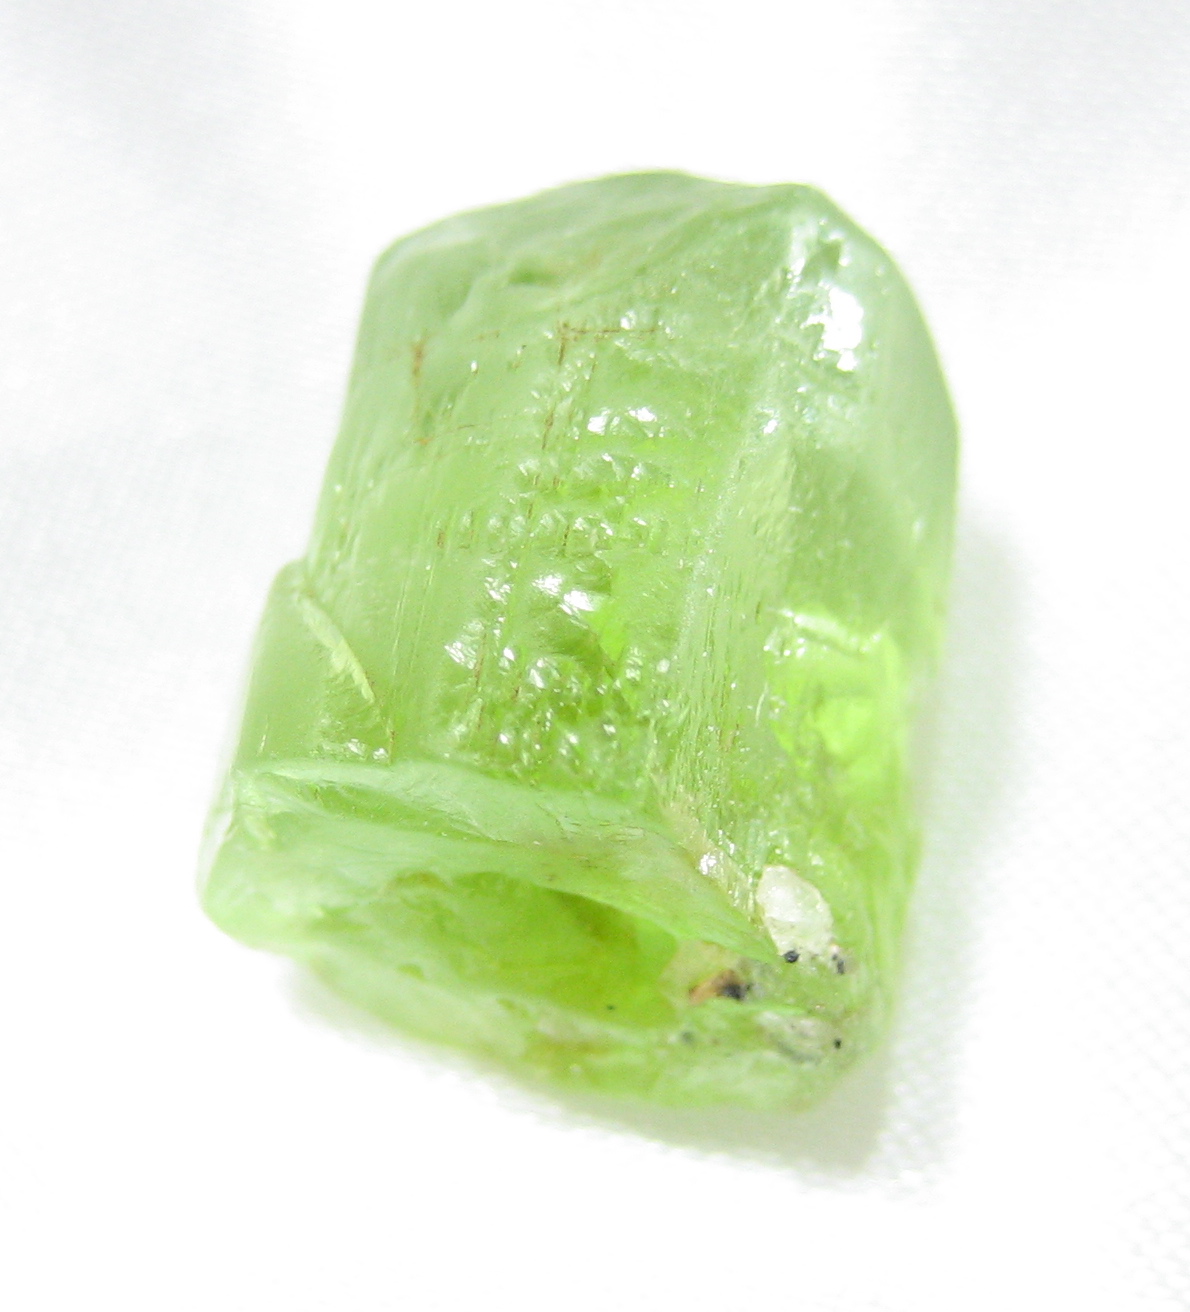 Light green chunk that reflects light and has no distinguishable crystals inside